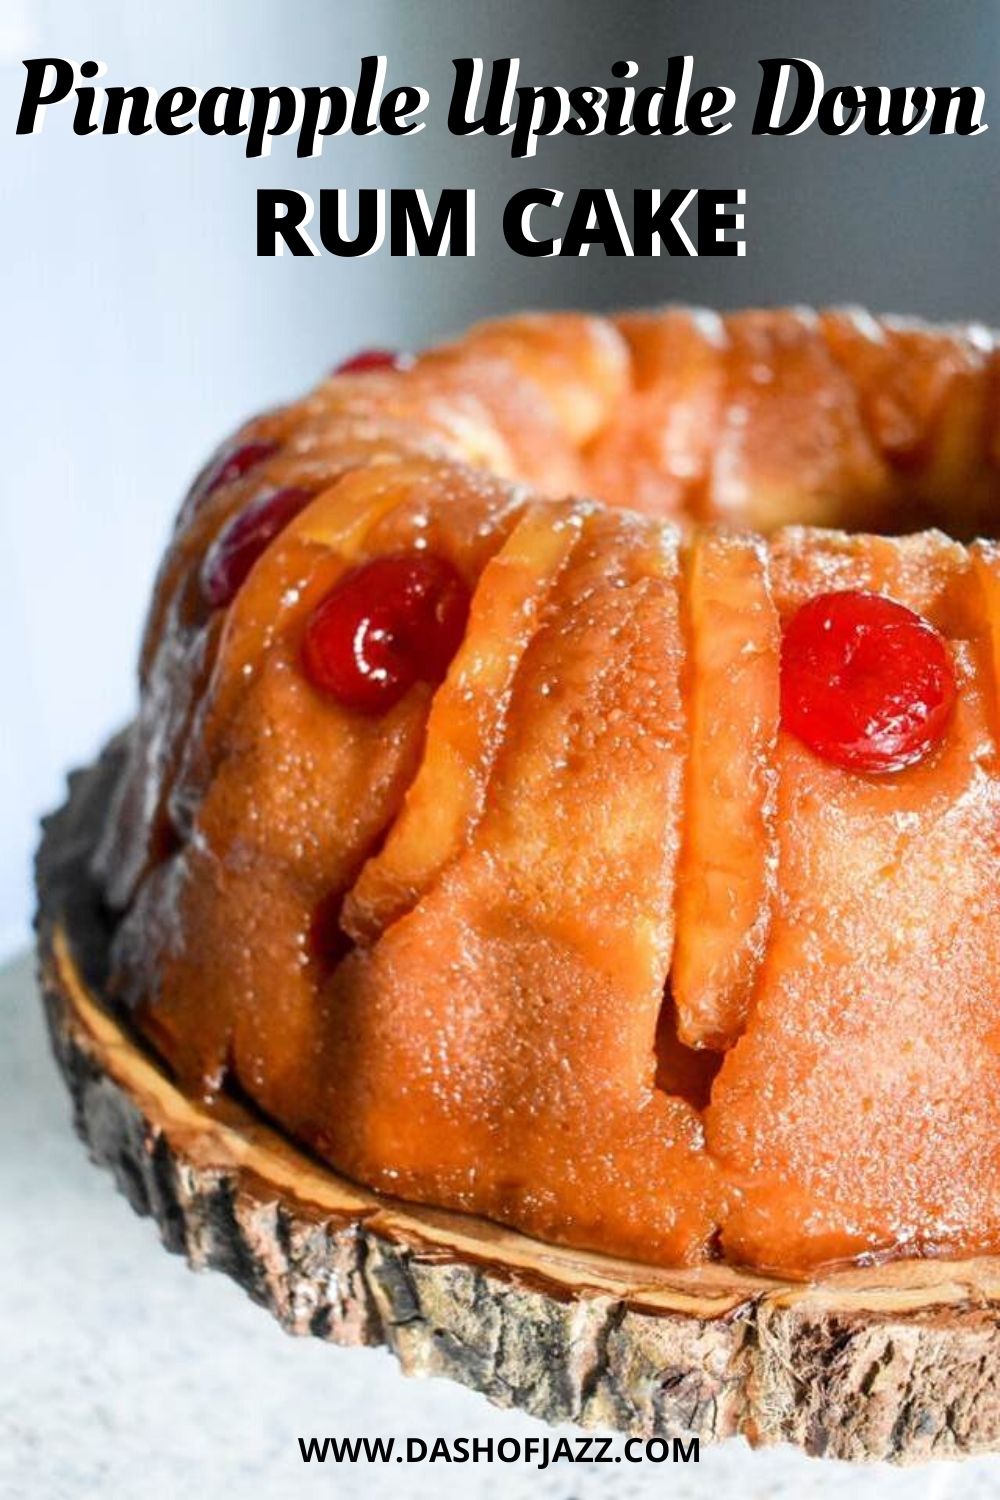 pineapple upside down rum cake with text overlay.